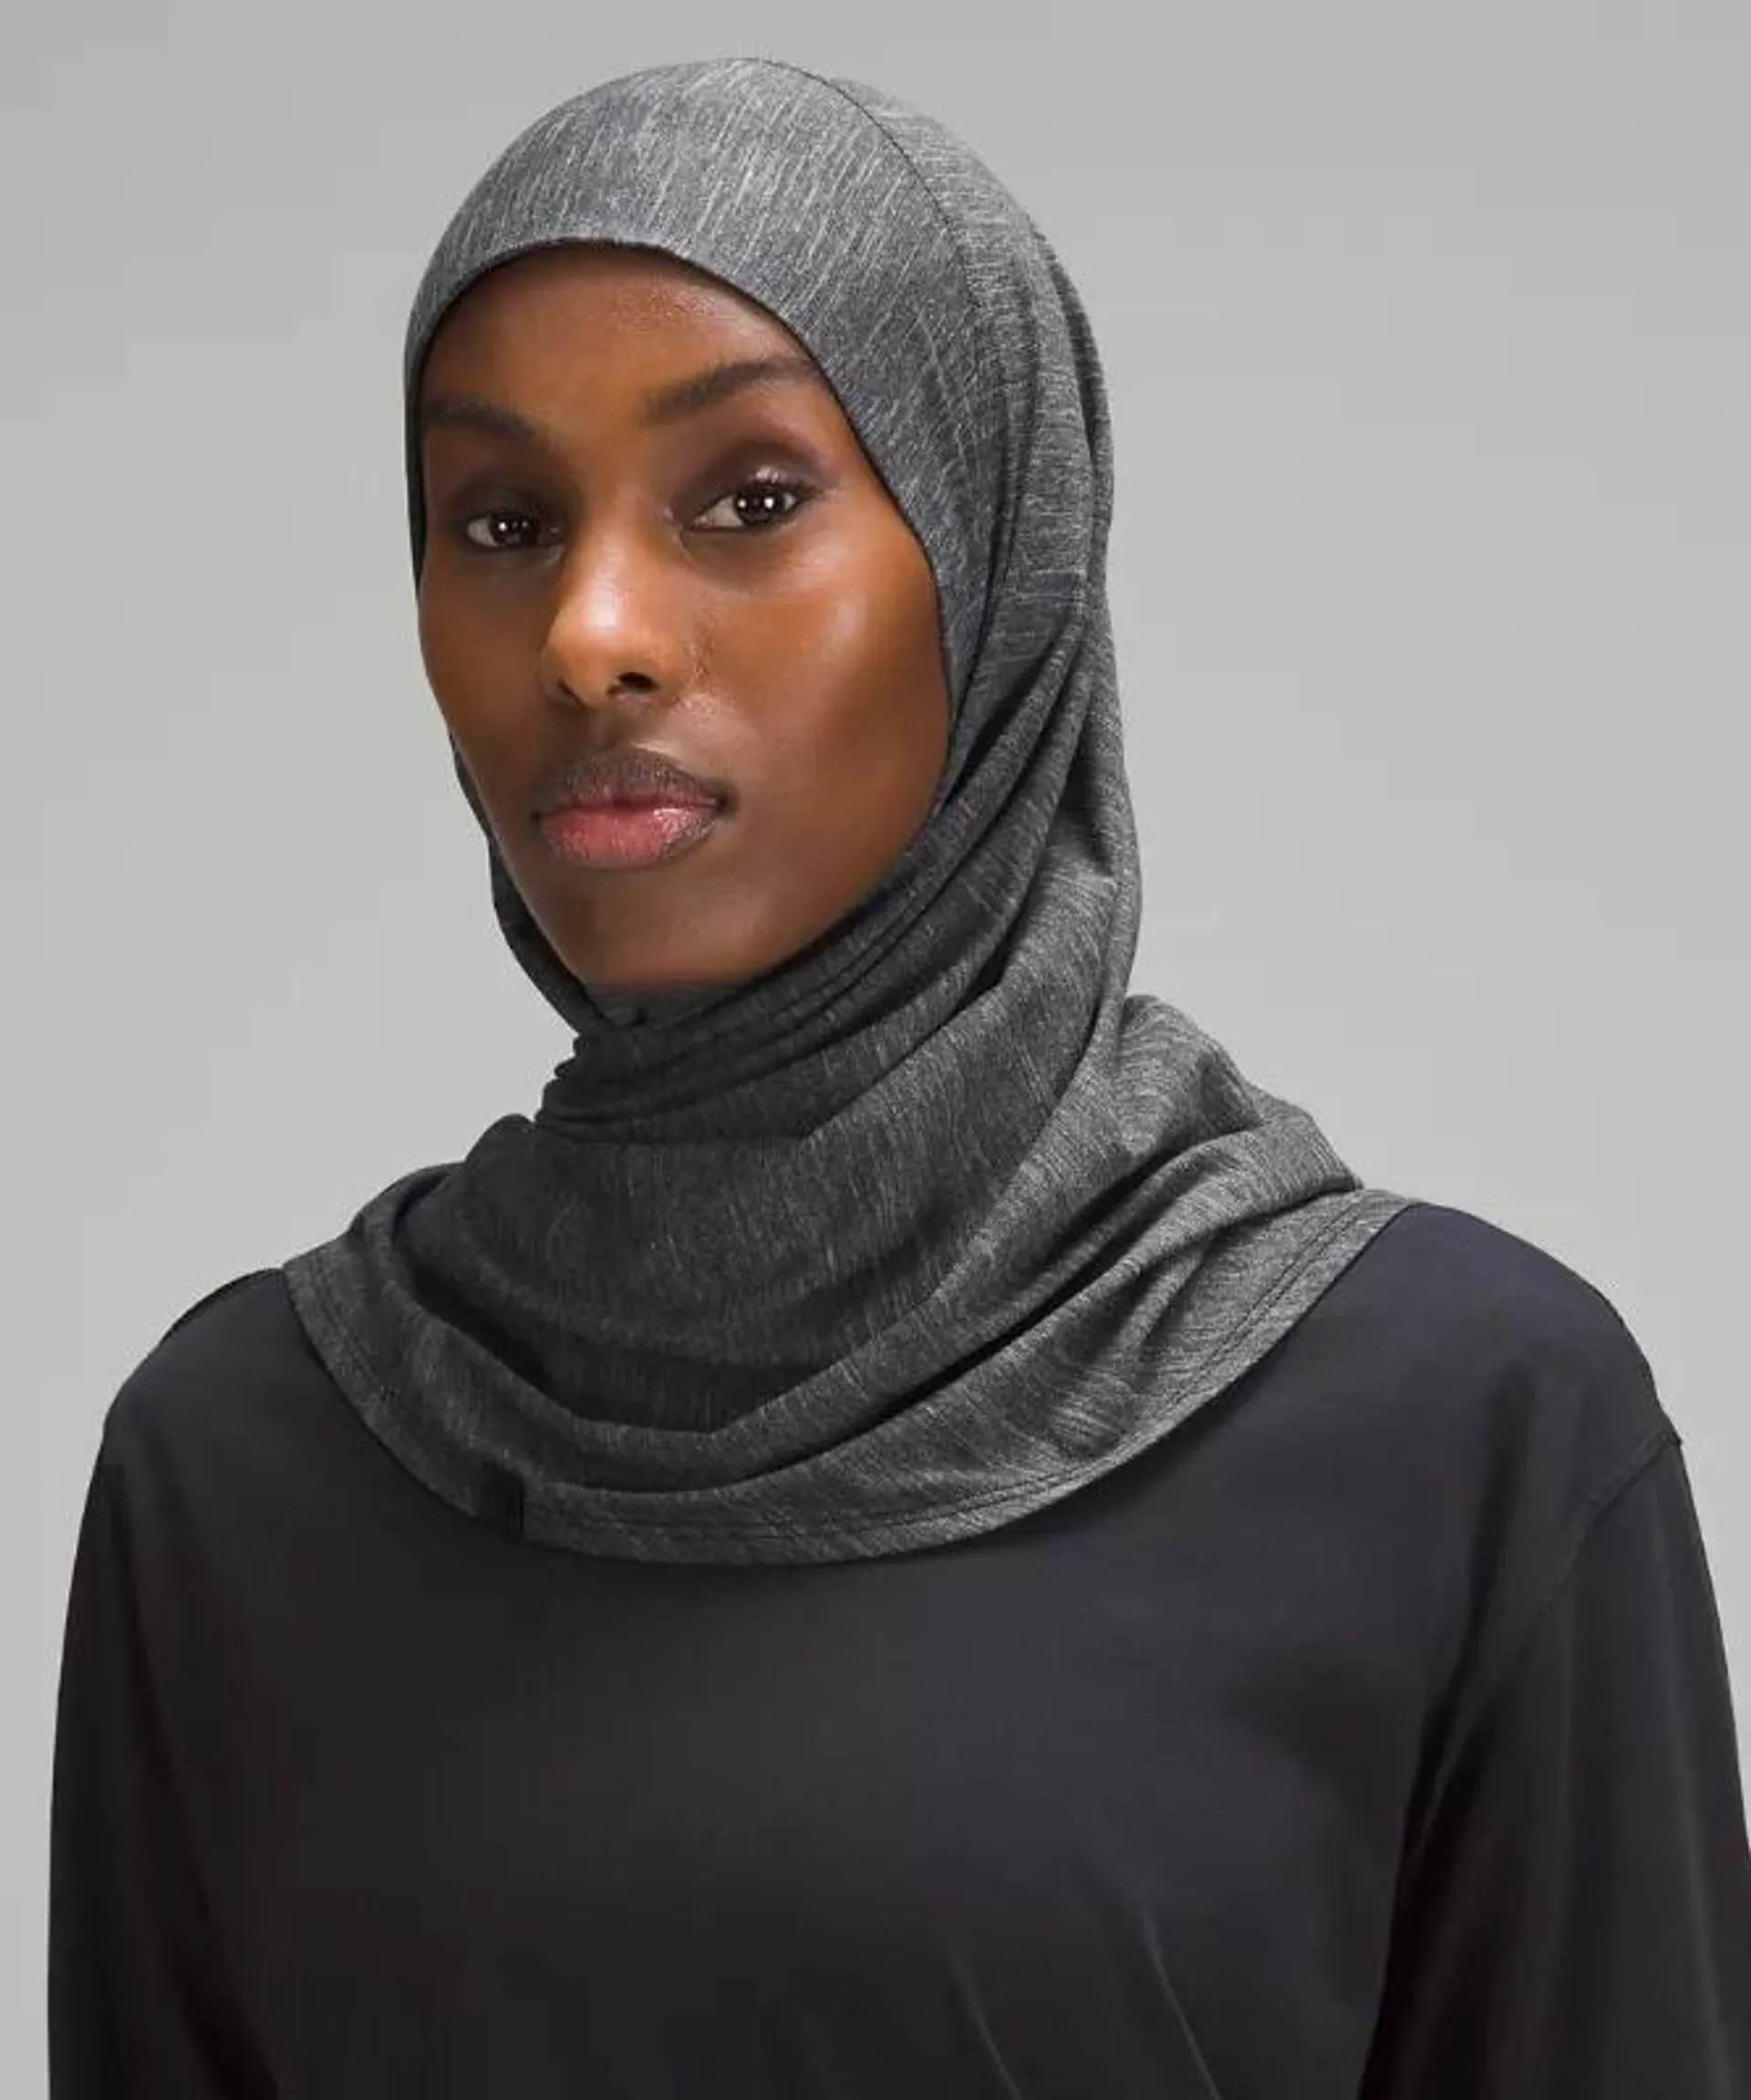 Women's Pull-On-Style Hijab